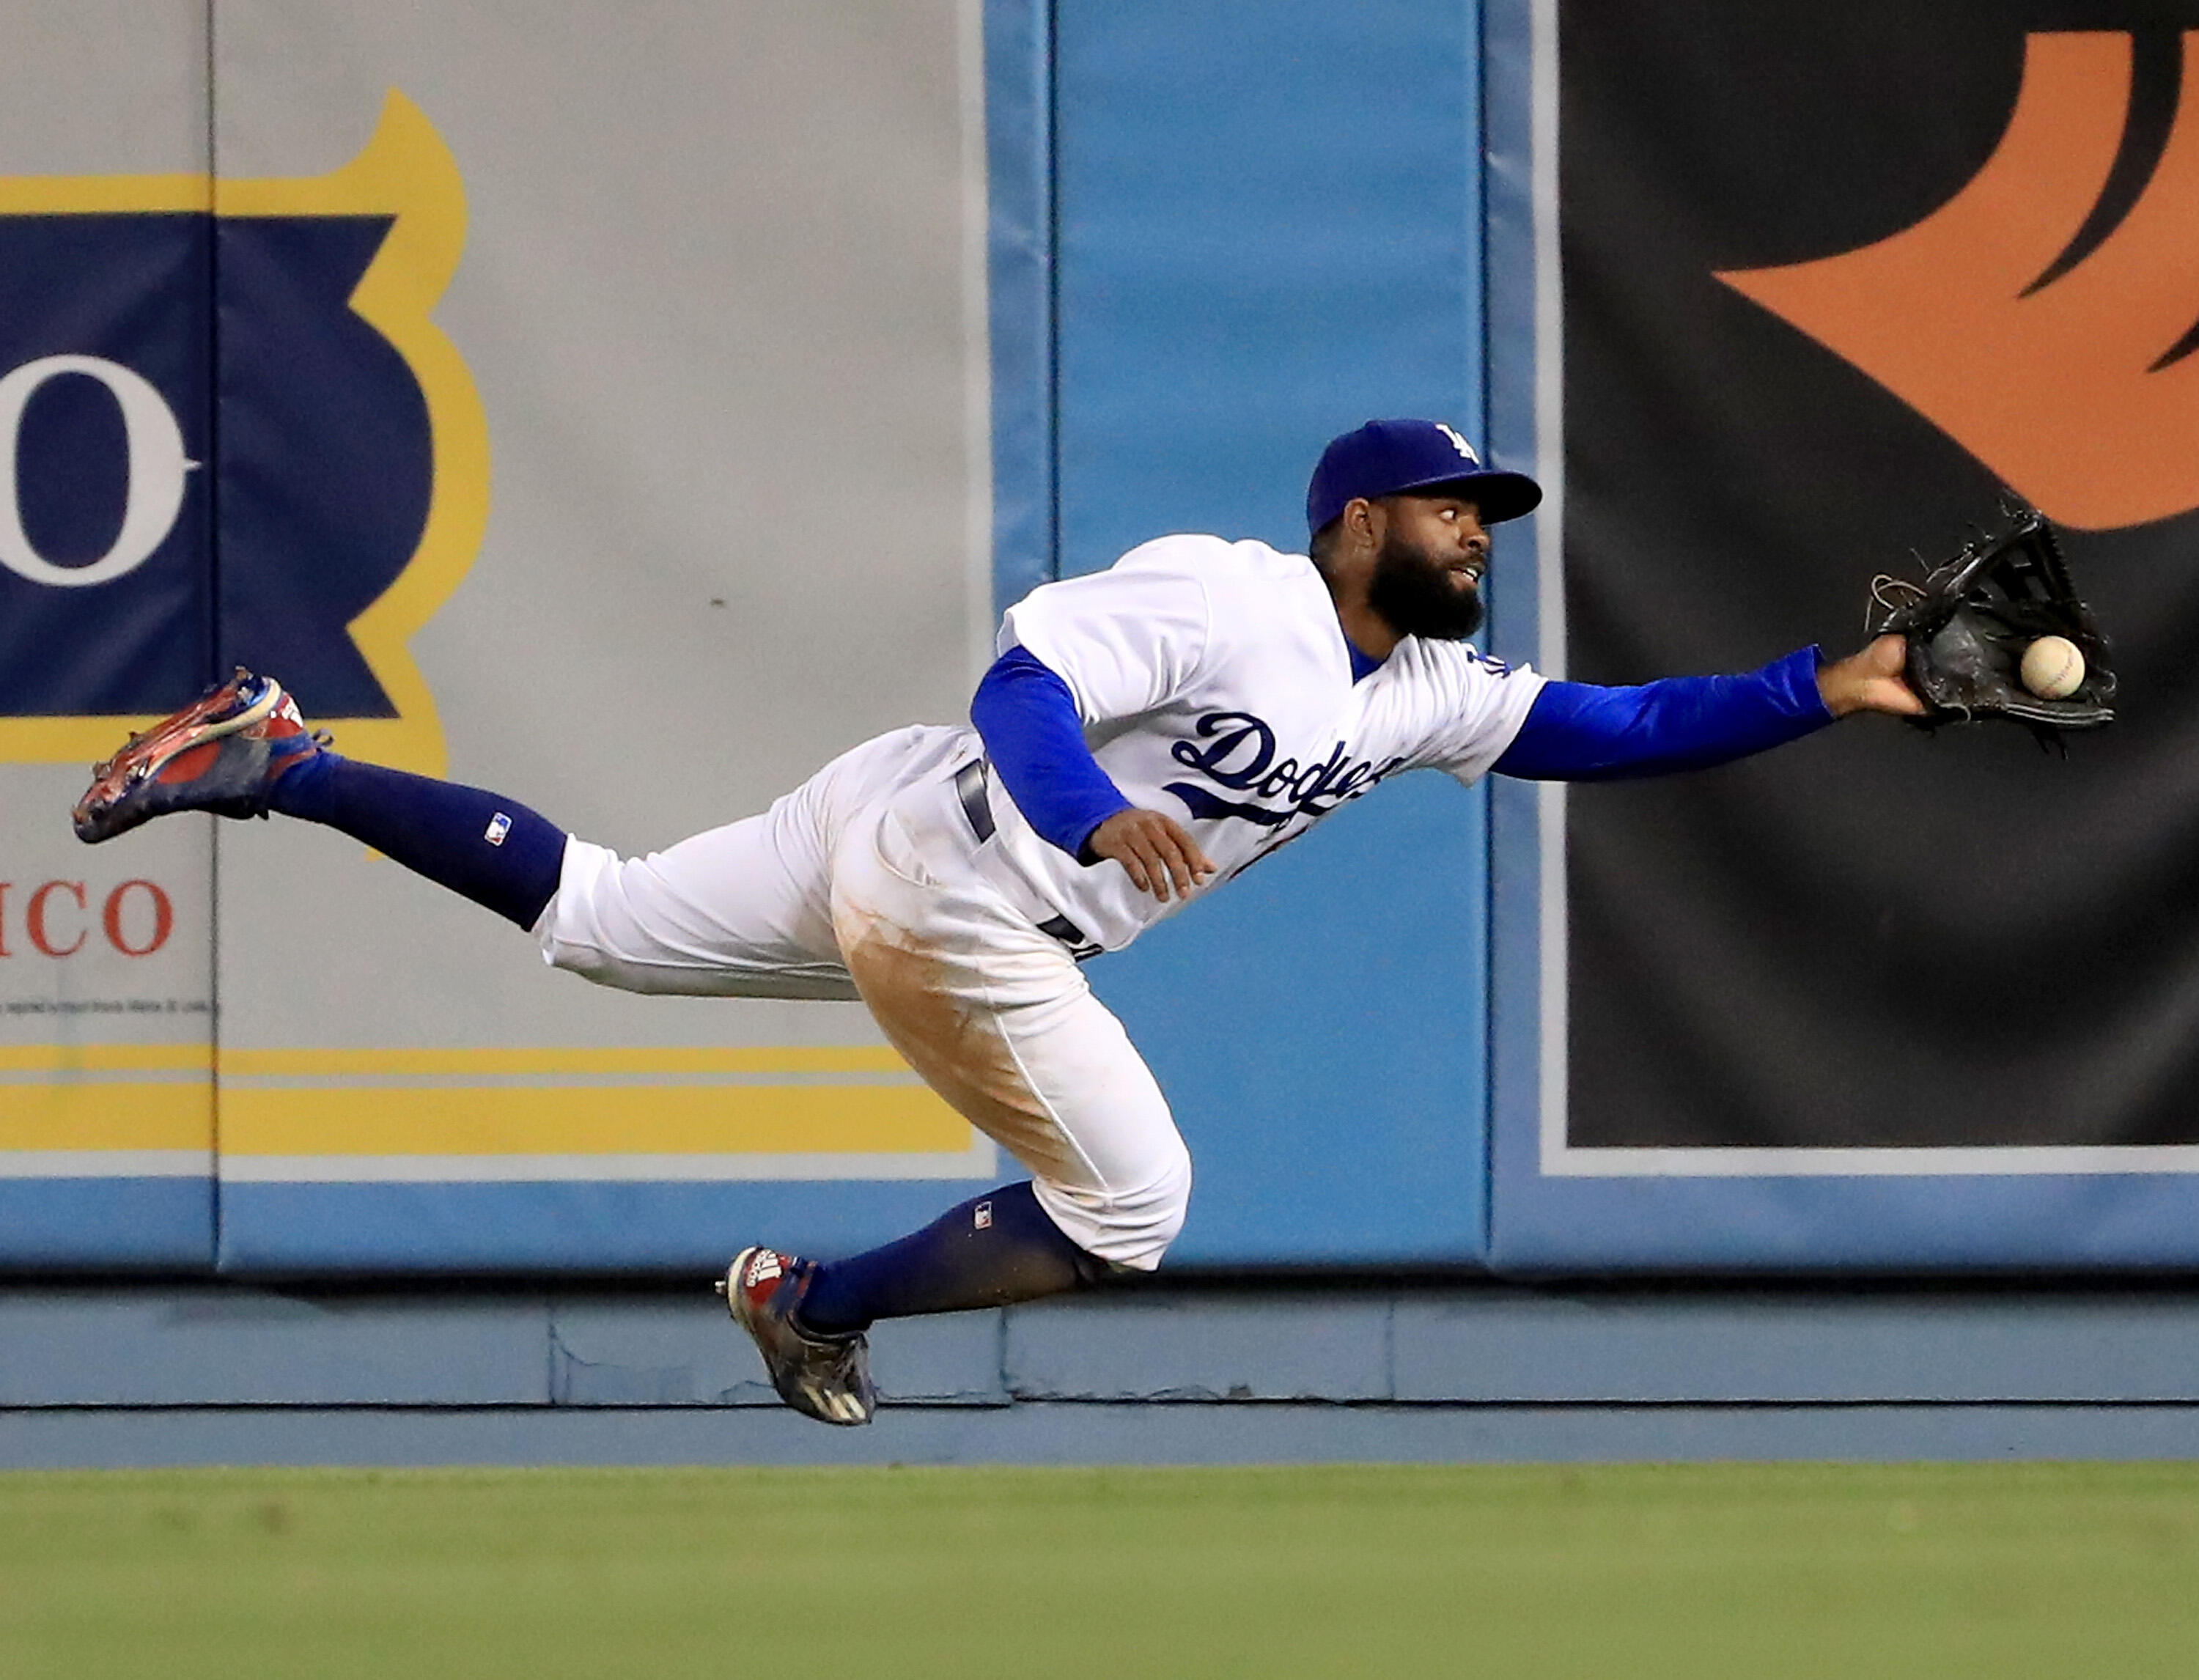 LOS ANGELES, CA - MAY 03:  Andrew Toles #60 of the Los Angeles Dodgers makes a running catch for an out of Hunter Pence #8 of the San Francisco Giants during the 11th inning at Dodger Stadium on May 3, 2017 in Los Angeles, California.  (Photo by Harry How